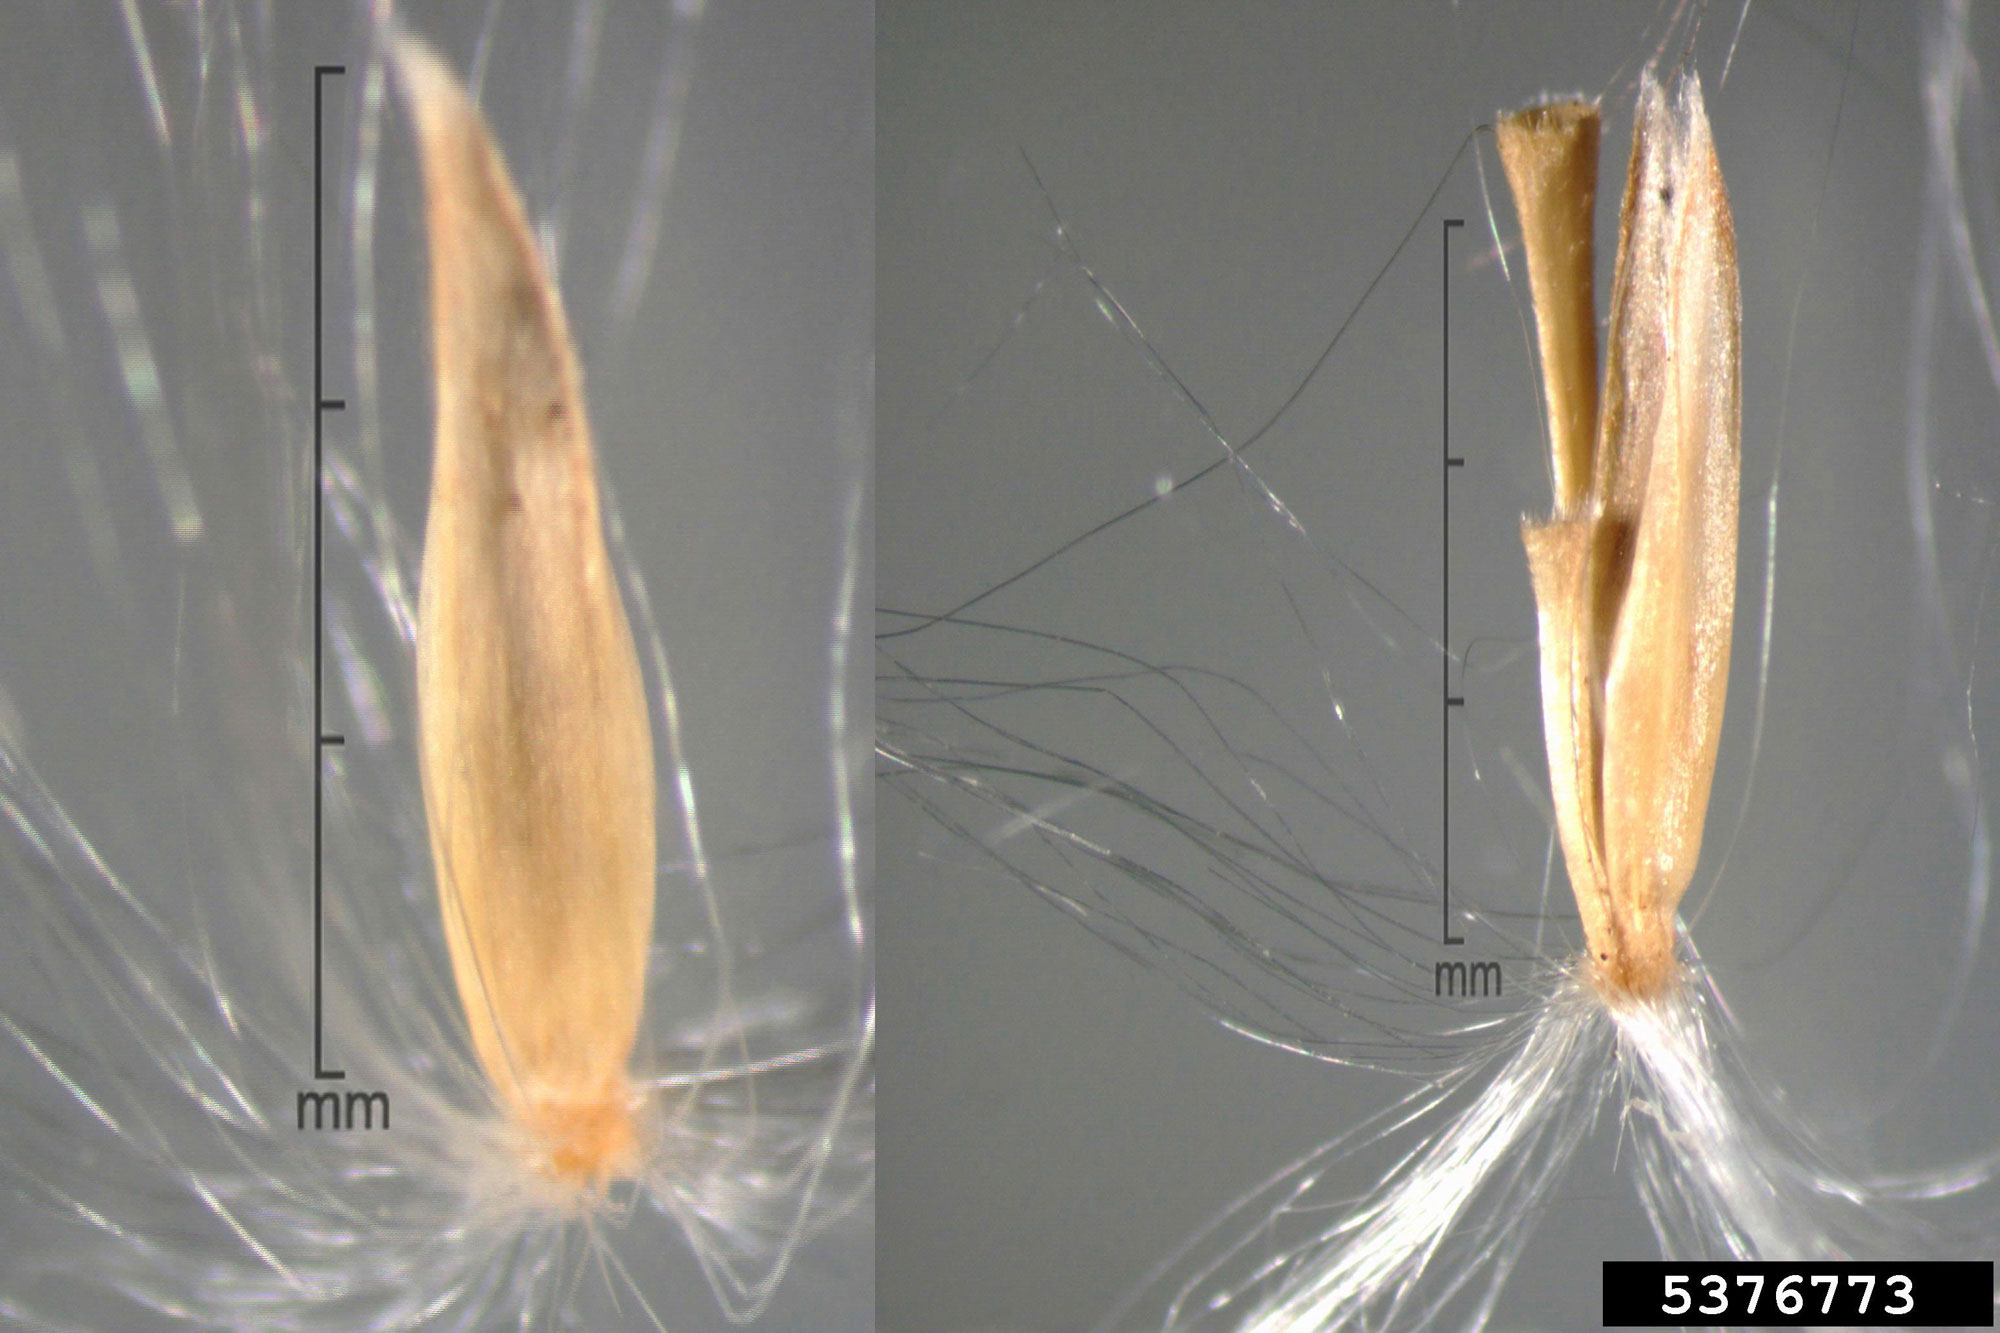 Photograph showing two views of a disseminule of sugarcane. The disseminule consists of a sessile caryopsis (grain) with its surrounding bracts and two attached stalks. The shorter stalk is a pedicel from the pedicellate spikelet and the longer stalk is part of the rame axis (branch).